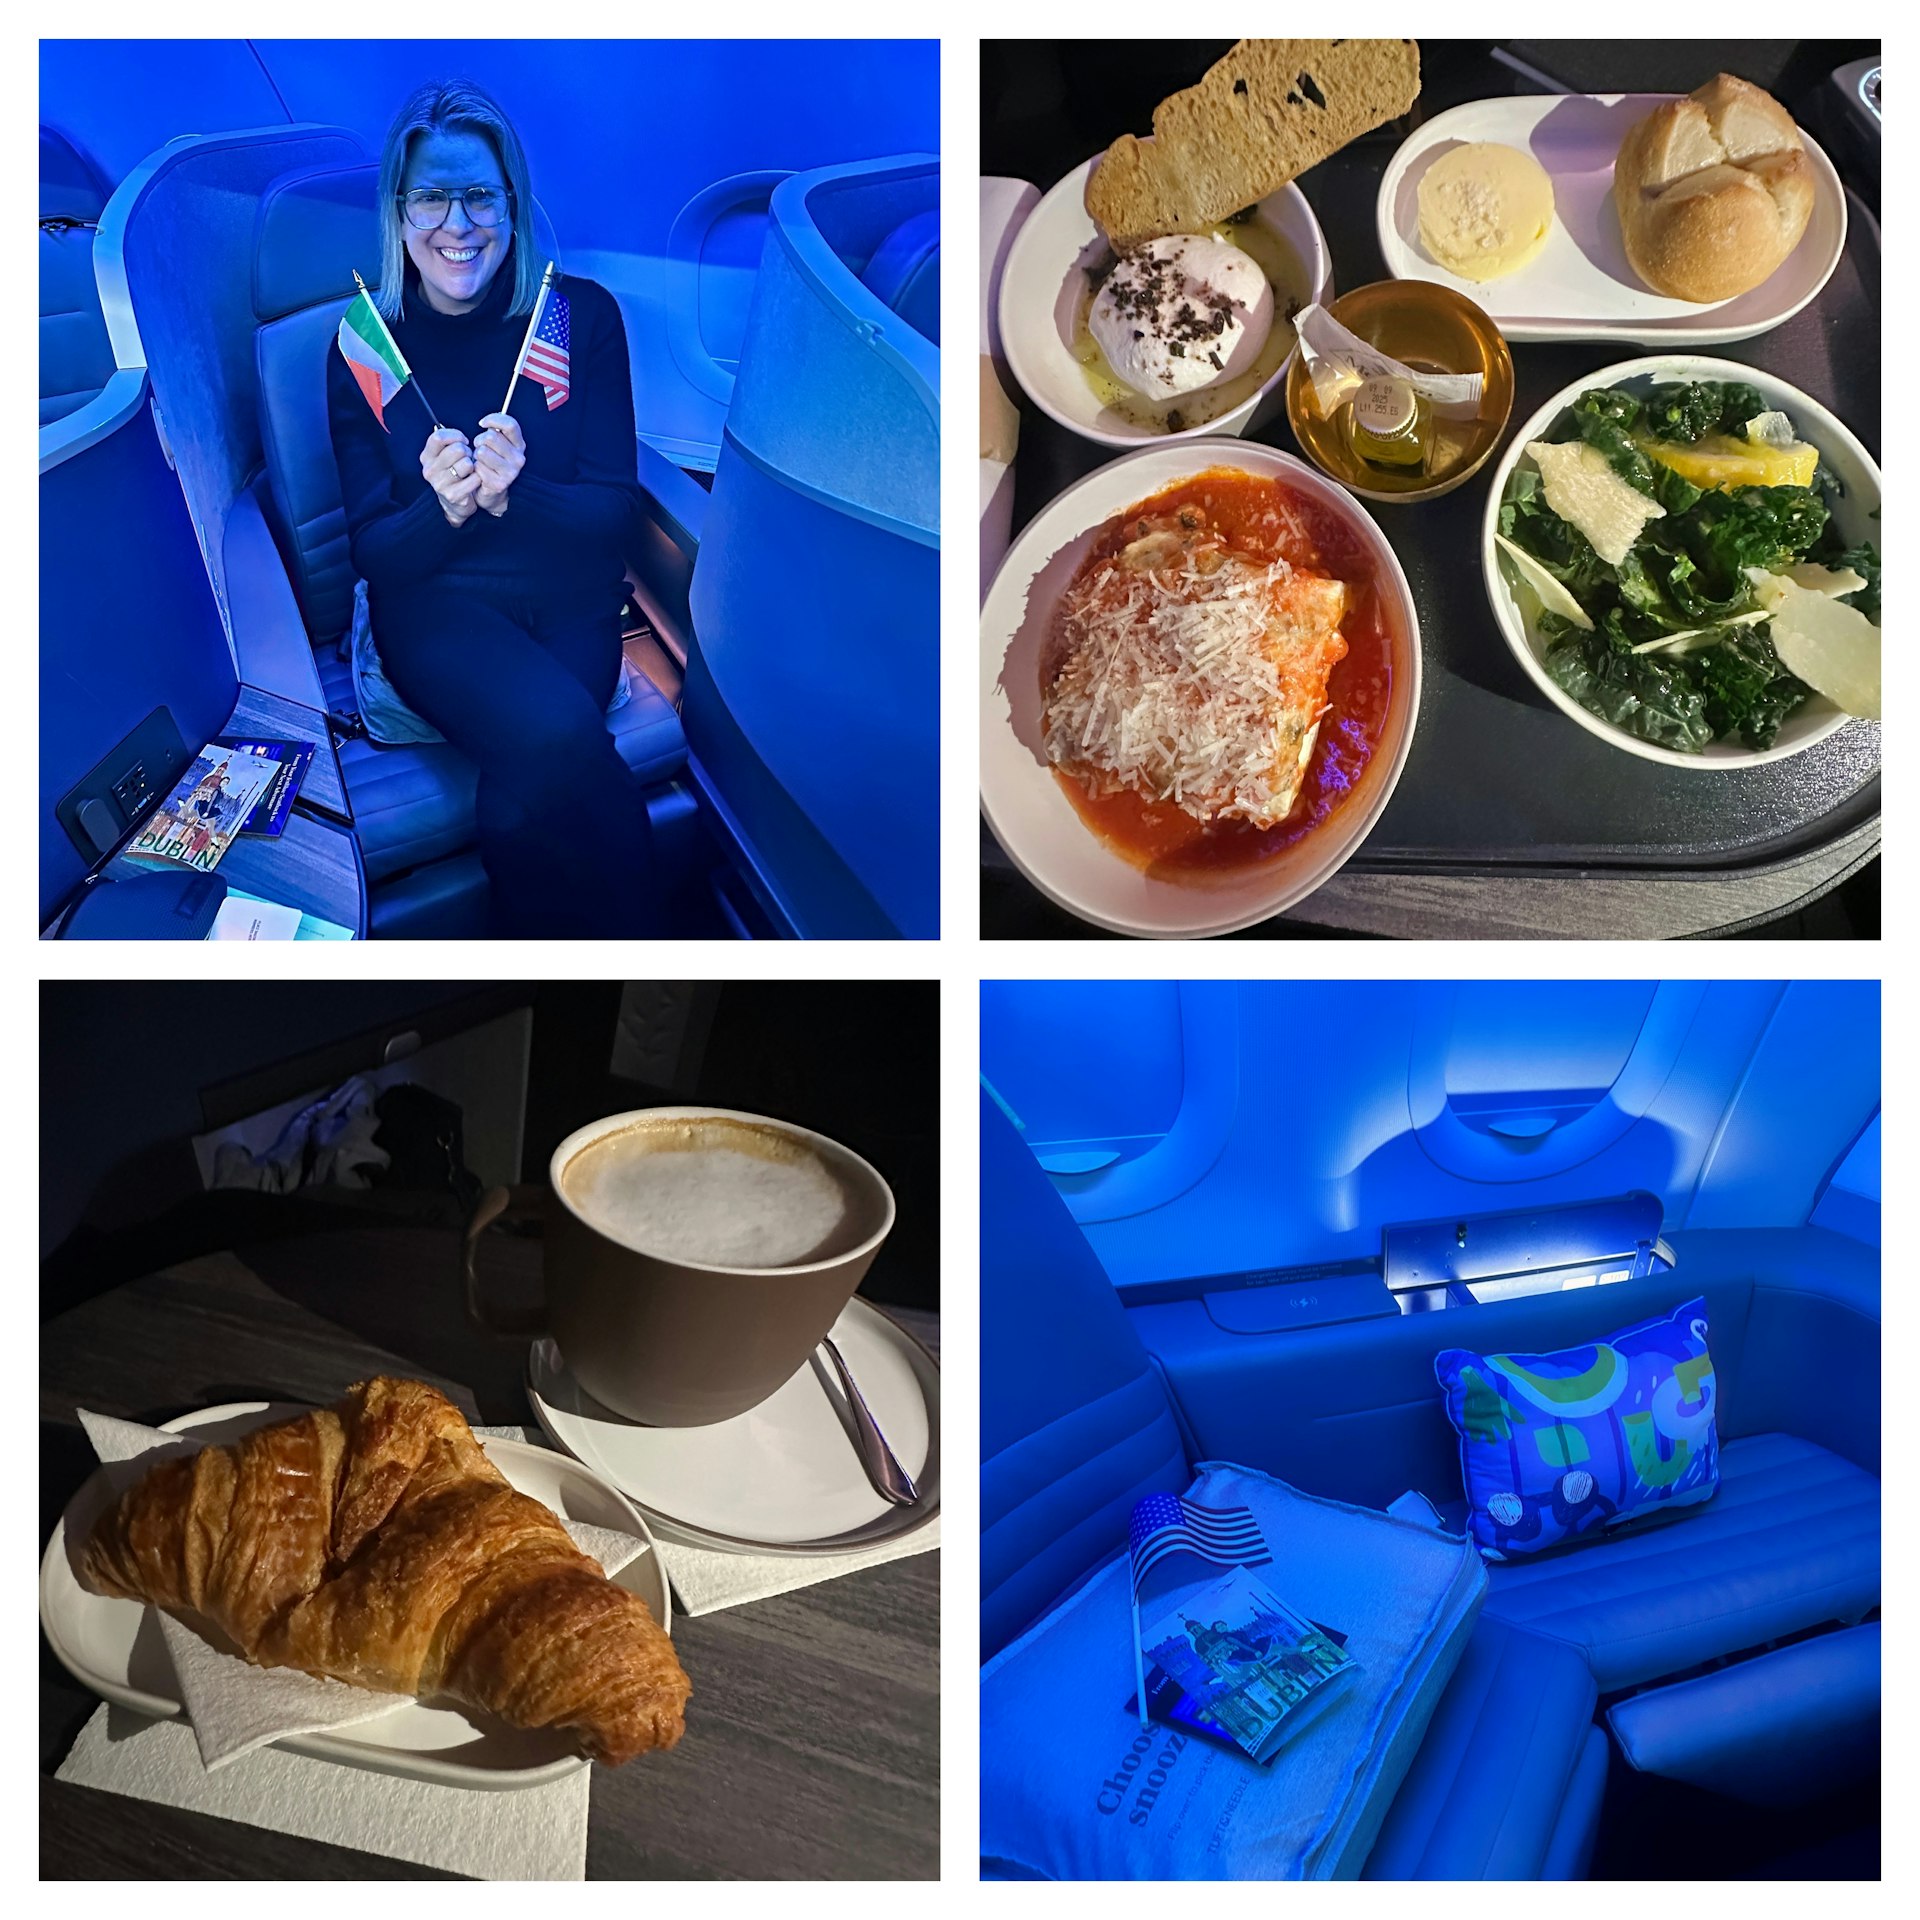 A collage with a woman holding an Irish and a US flag; a tray of inflight food; a croissant and coffee; a dimly lit seating space on a plane